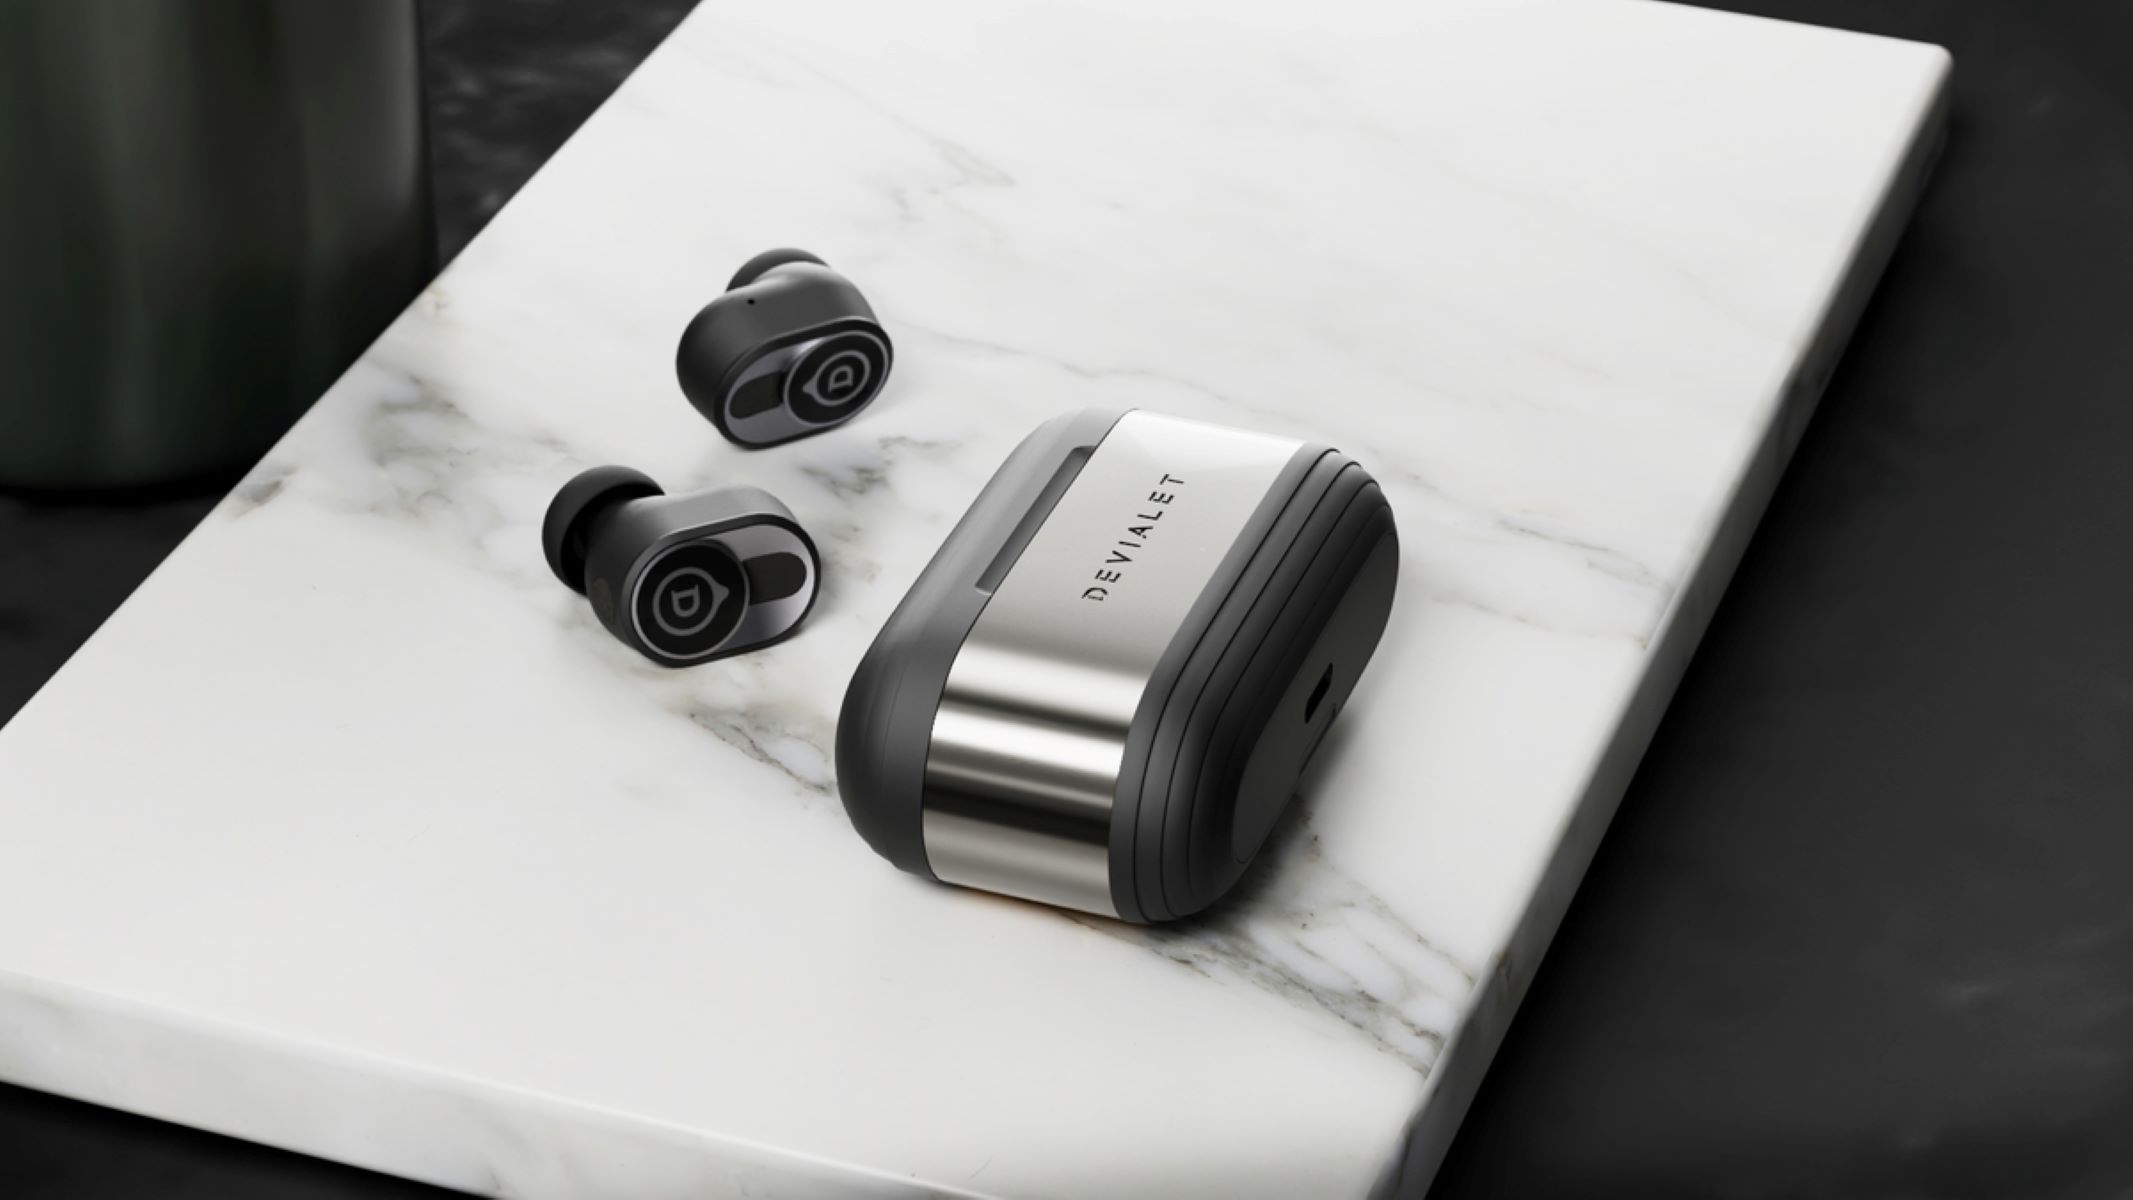 devialet-launches-new-generation-gemini-ii-wireless-earbuds